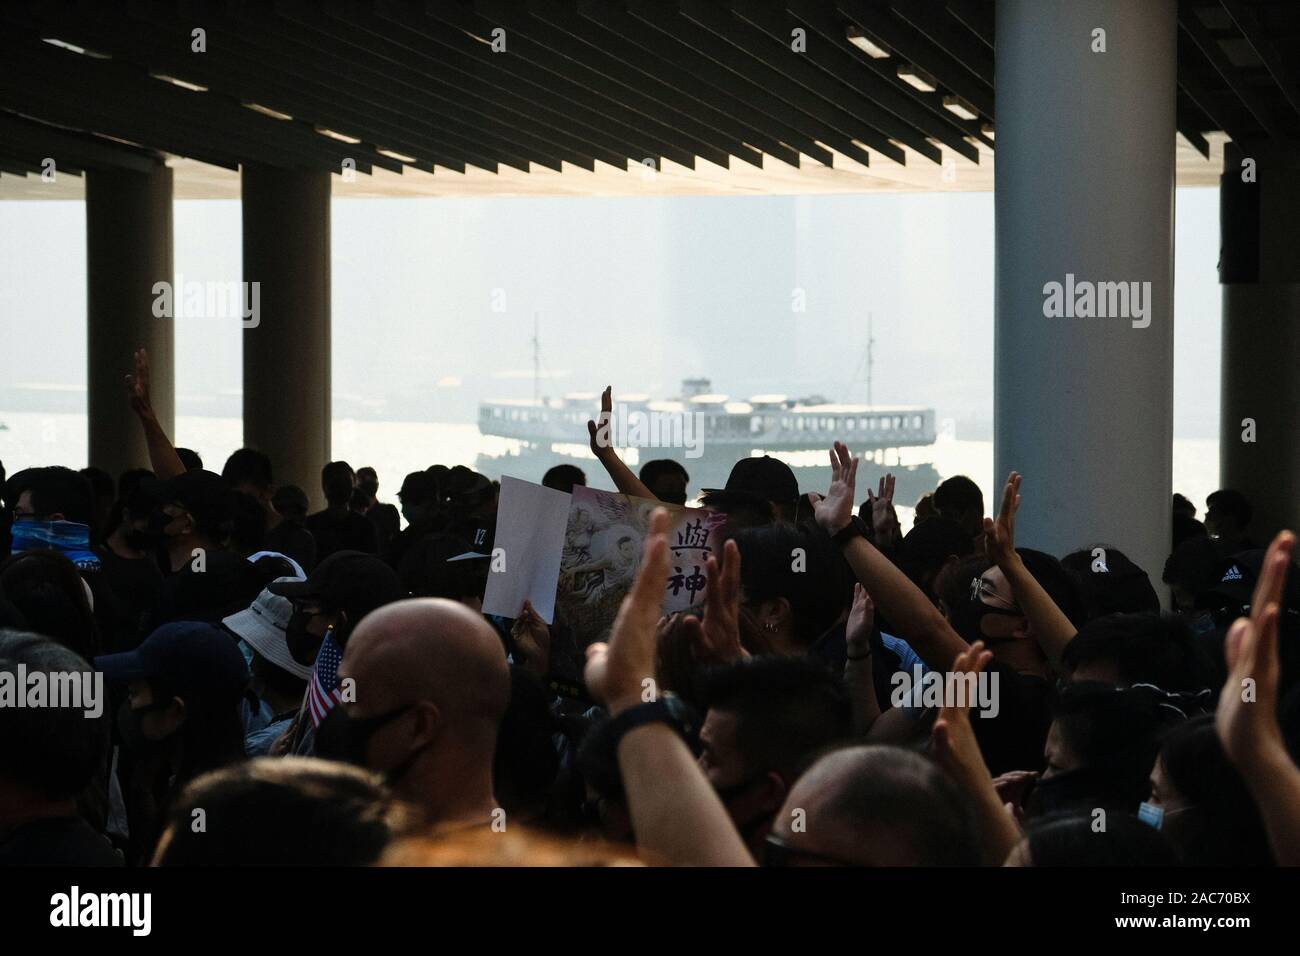 Protesters make gestures during the demonstration.Demonstrations in Hong Kong continue as pro-democracy groups won the District Council elections recently. Protesters continue to call for Hong Kong's government to meet their 5 demands. Stock Photo